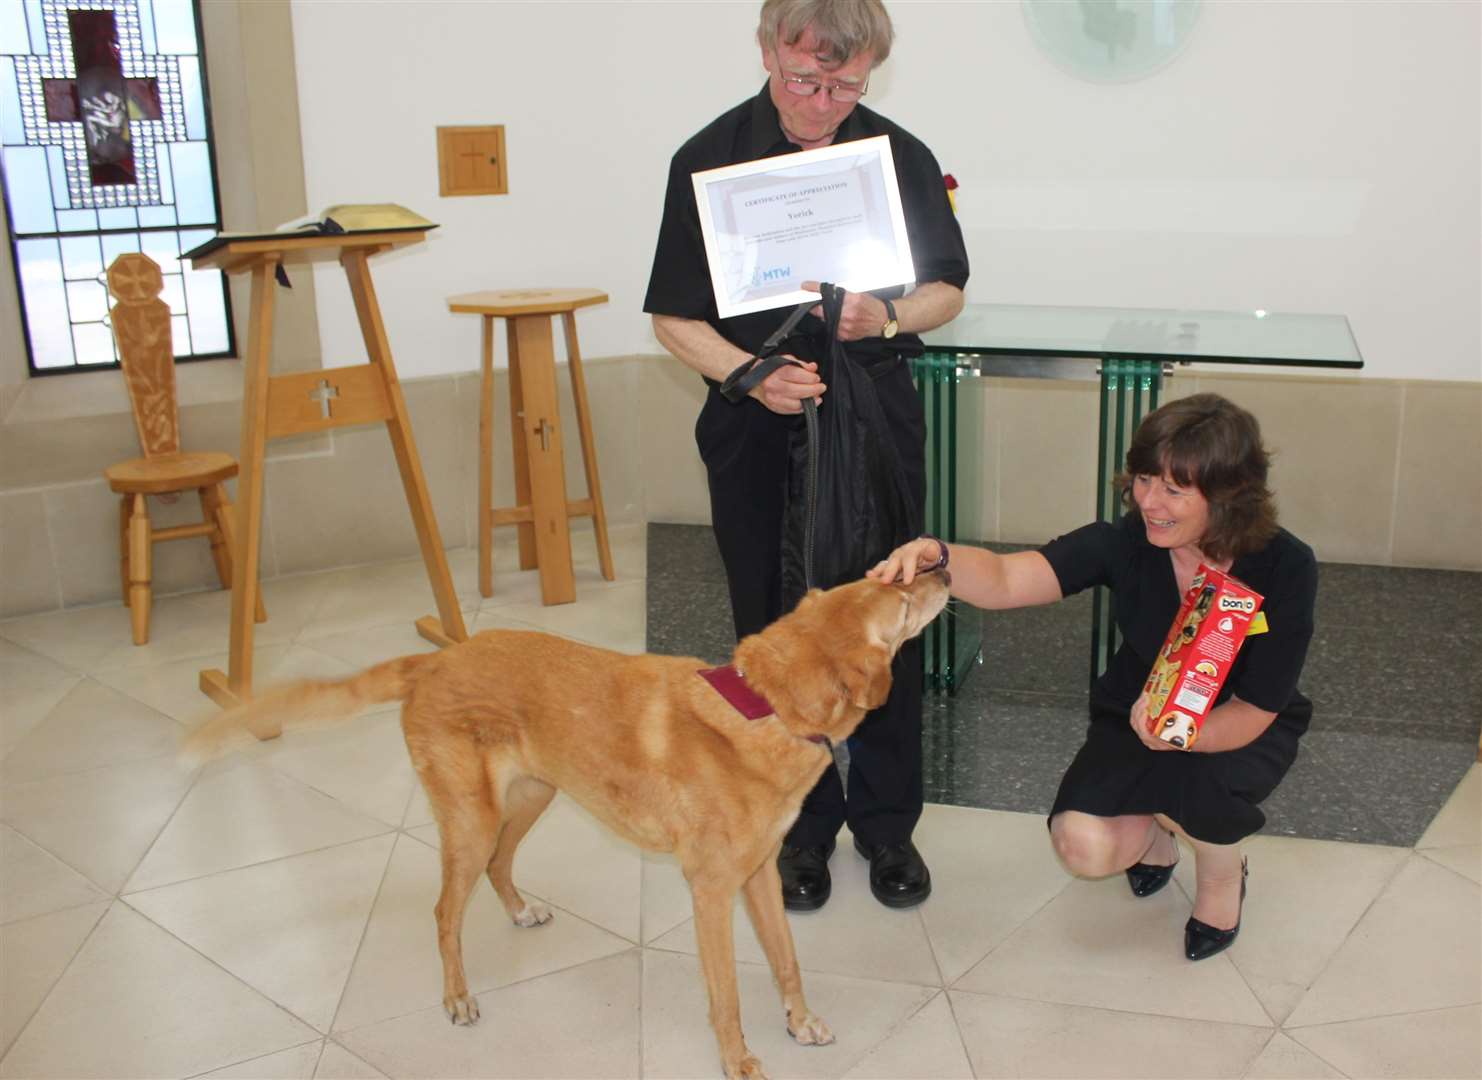 Yorick the dog had a presentation ceremony for his retirement